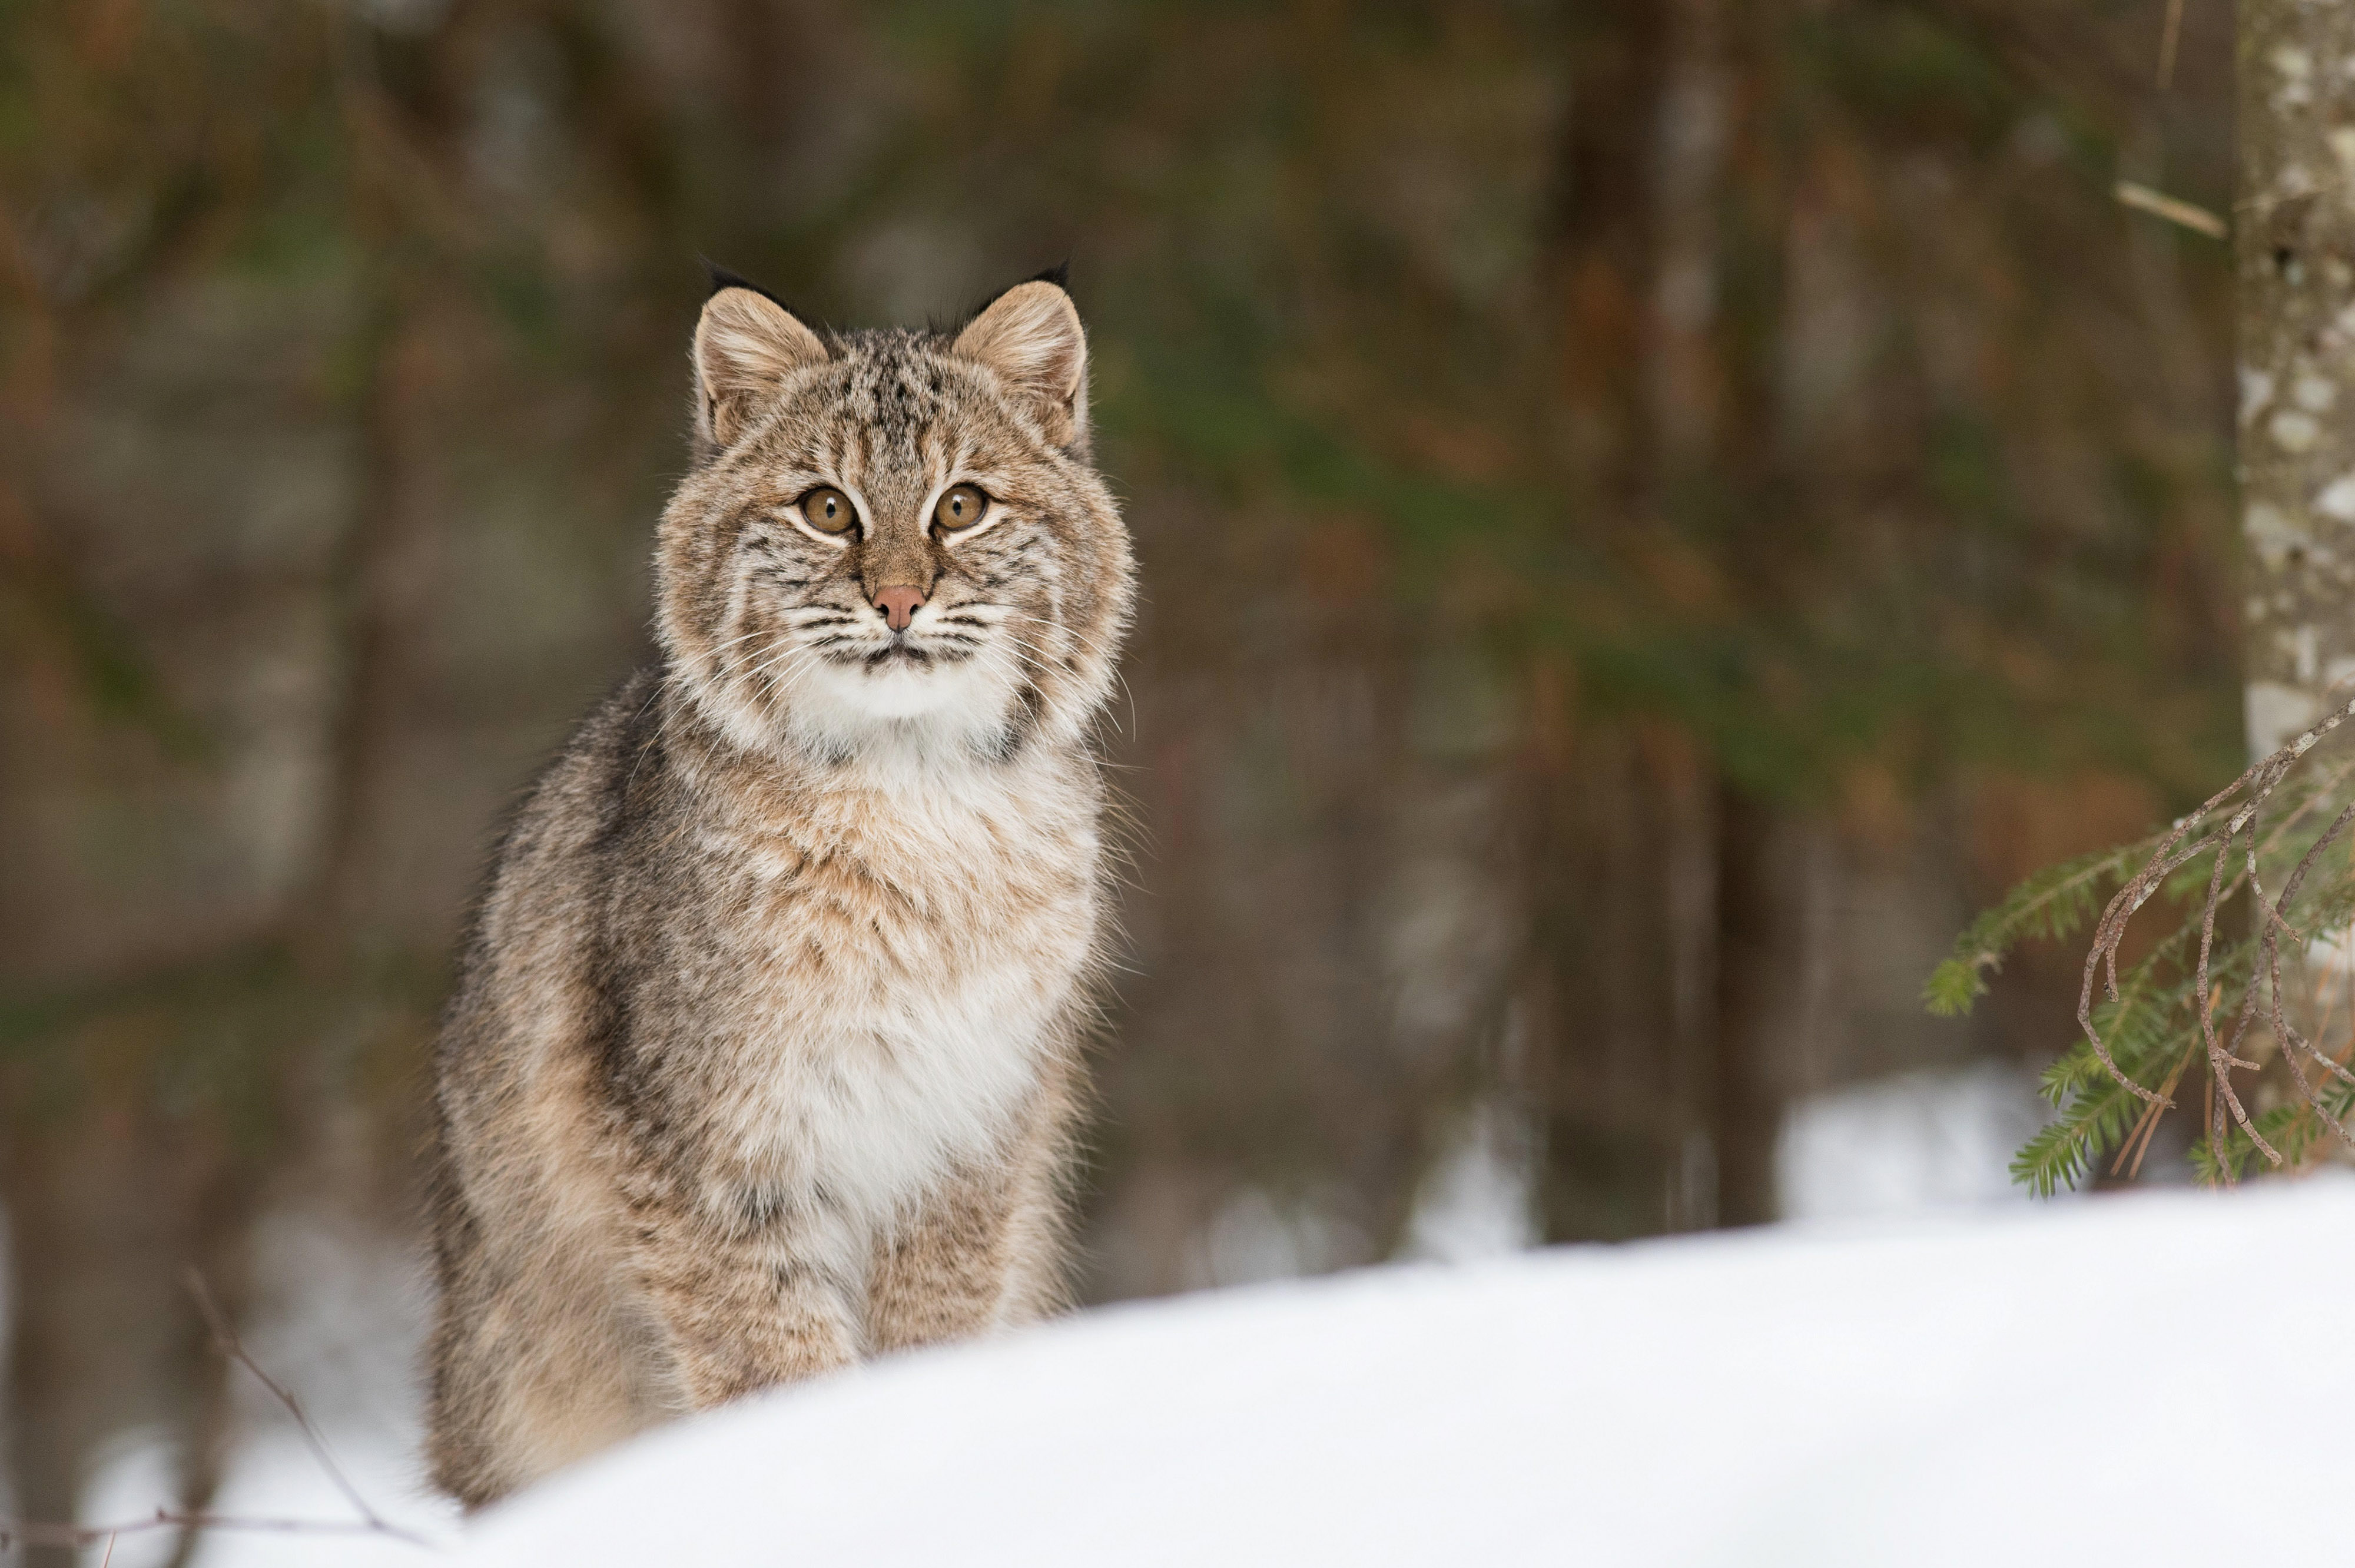 A gray striped bobcat stands in the snow looking at the camera.